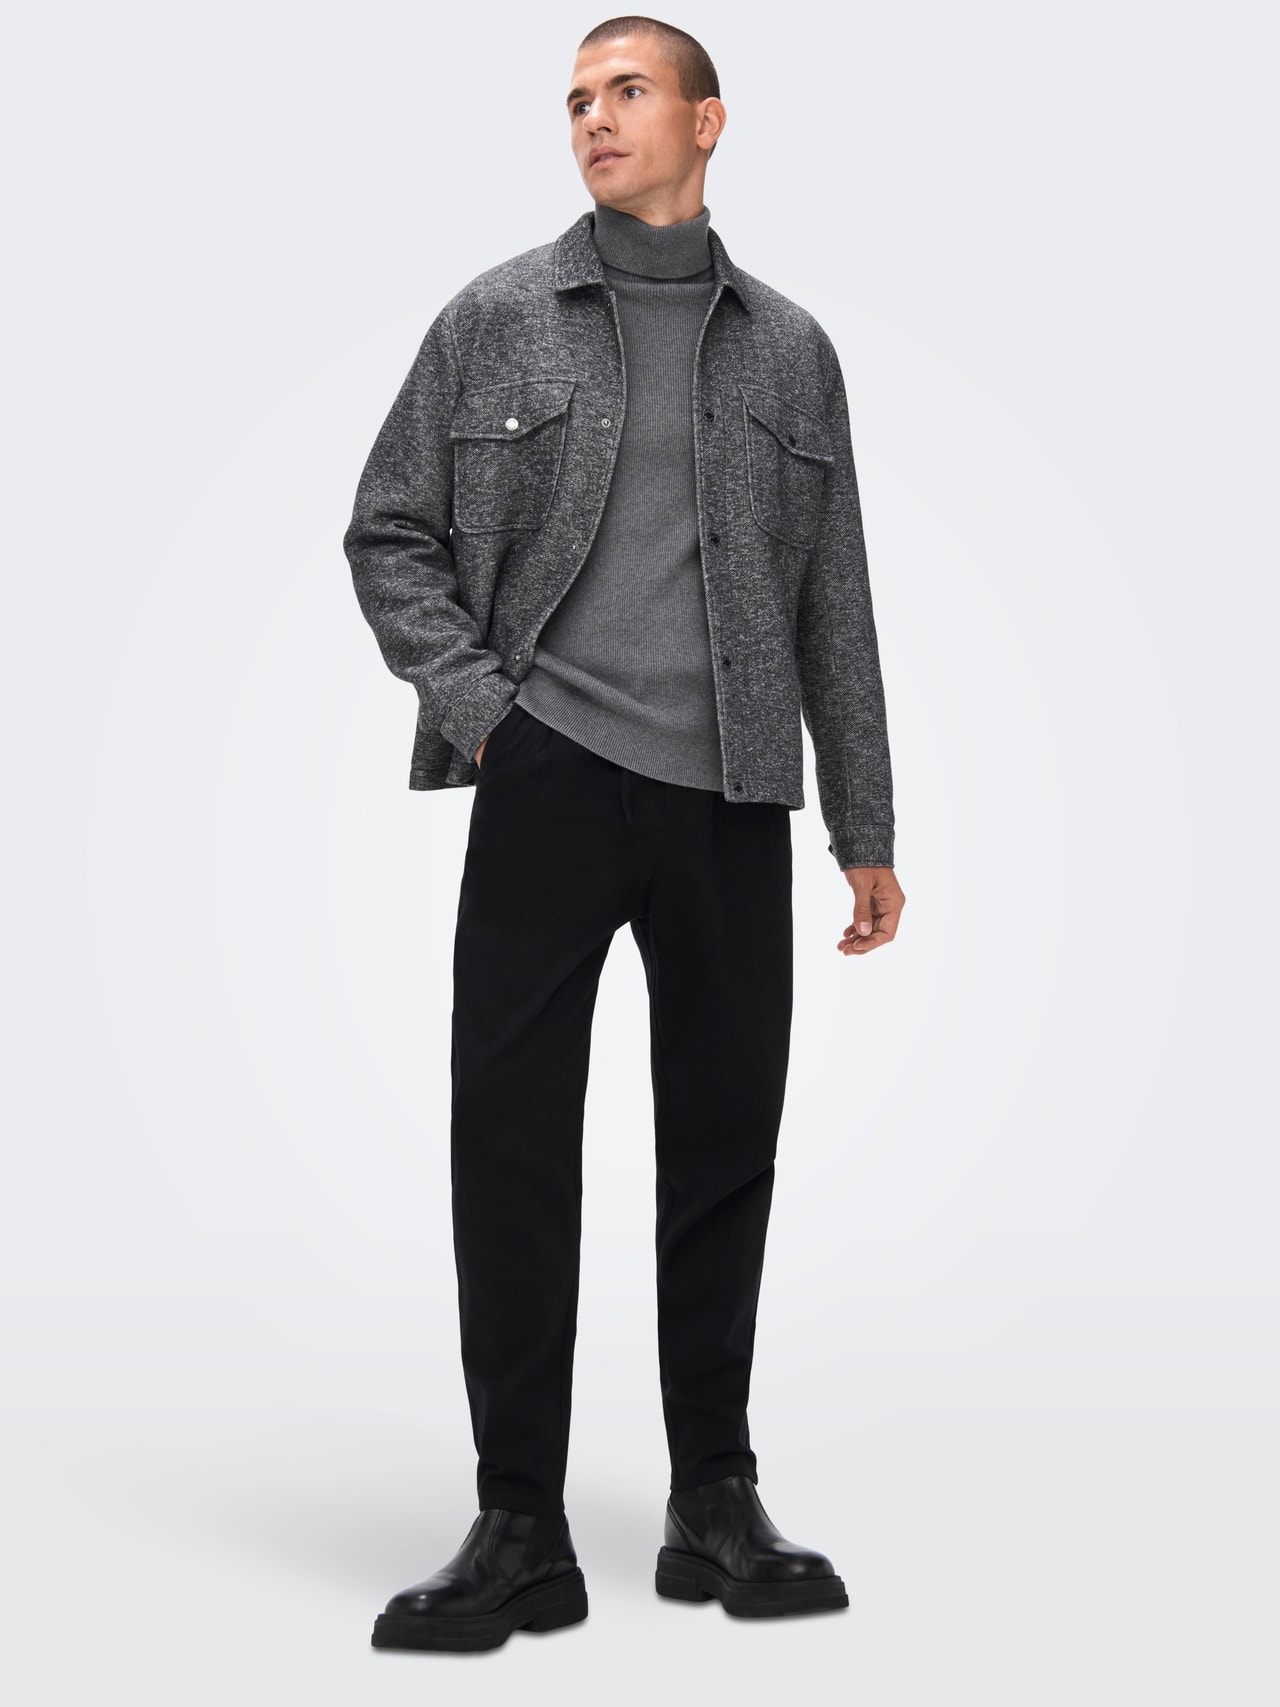 ONLY & SONS Tapered fit Chino's -Black - 22023478